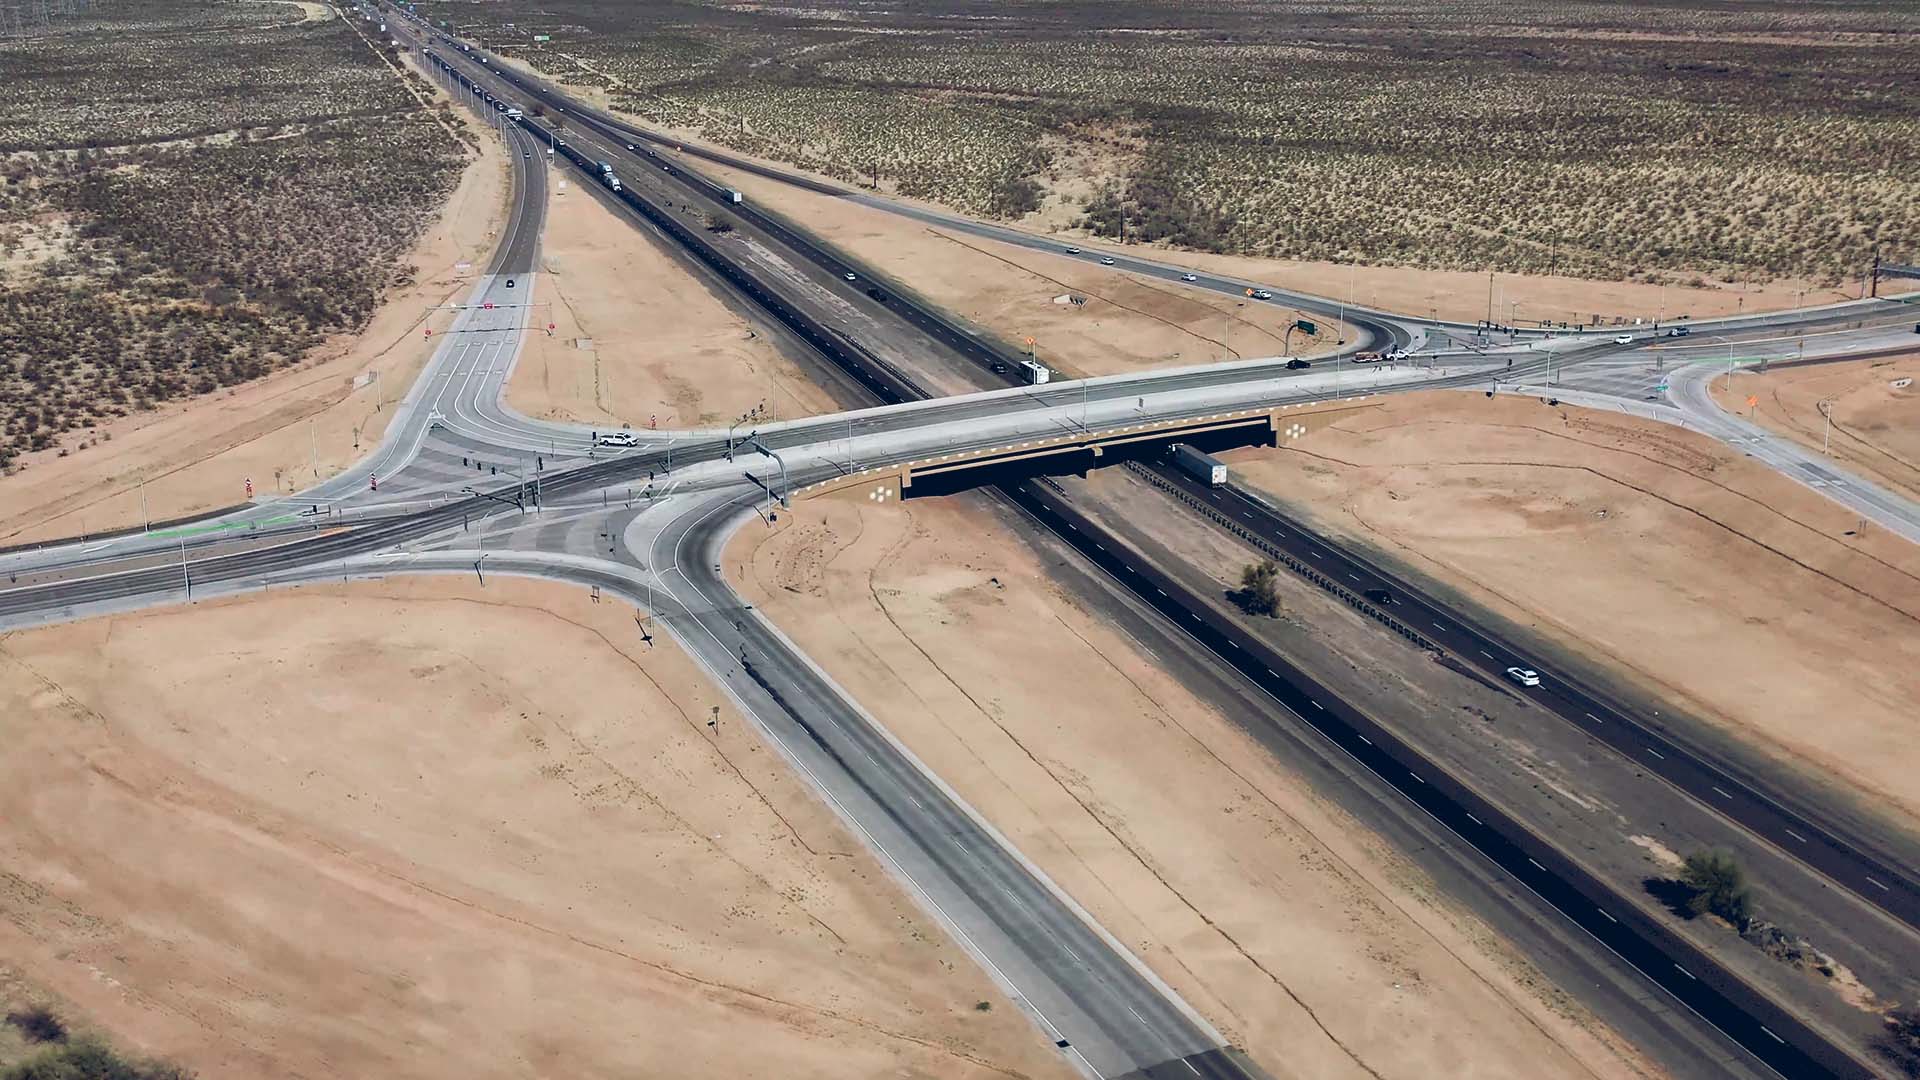 Overhead shot of a highway and off ramps in a desert